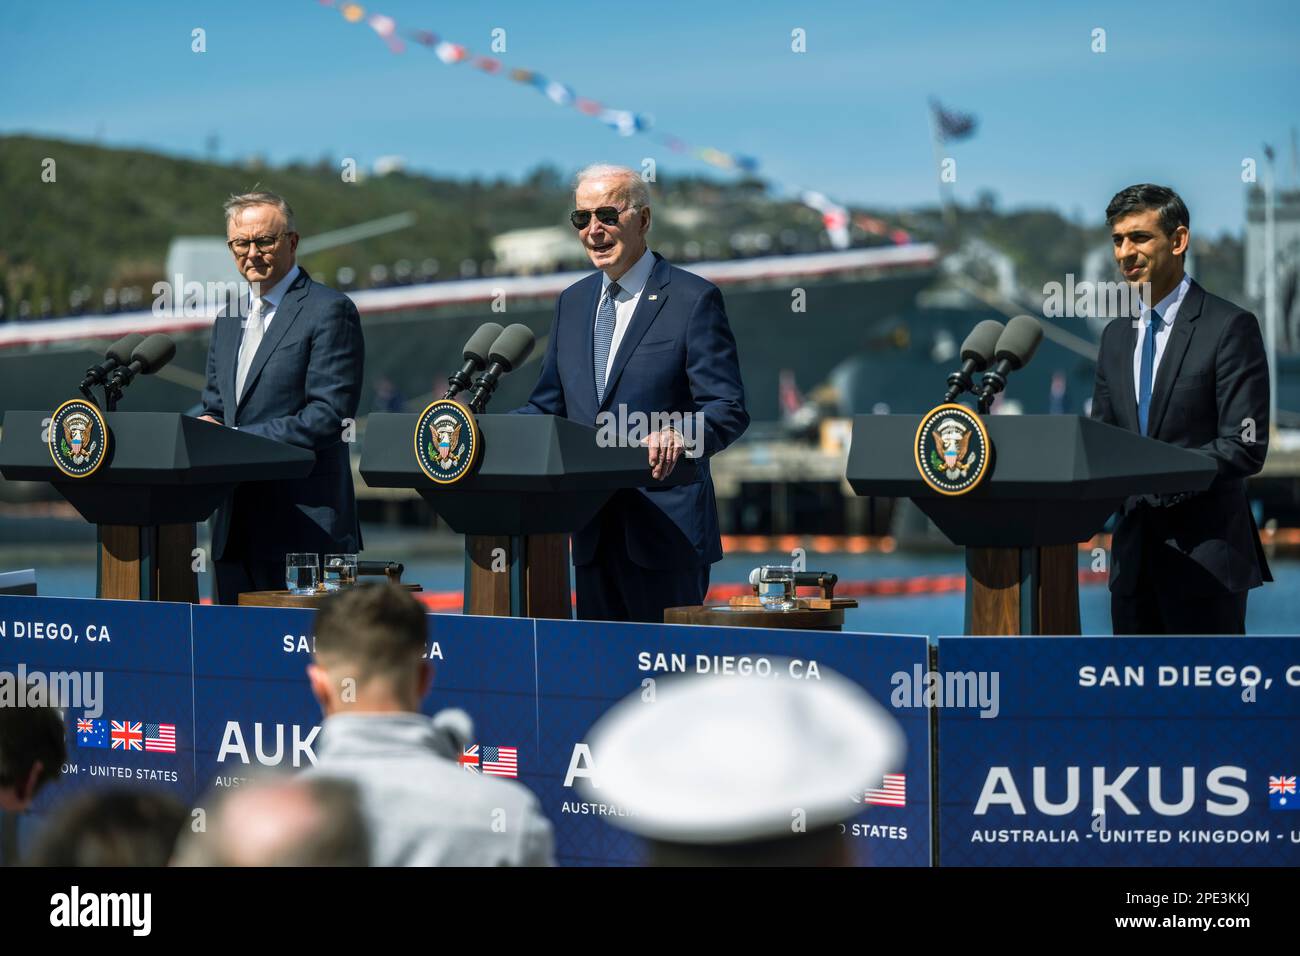 San Diego, United States of America. 13 March, 2023. U.S President Joe Biden, center, responds to a question as British Prime Minister Rishi Sunak, right, and Australian Prime Minister Anthony Albanese, left, look on during a press conference following their trilateral meeting at Point Loma naval base, March 13, 2023 in San Diego, California.  Credit: Chad McNeeley/DoD Photo/Alamy Live News Stock Photo